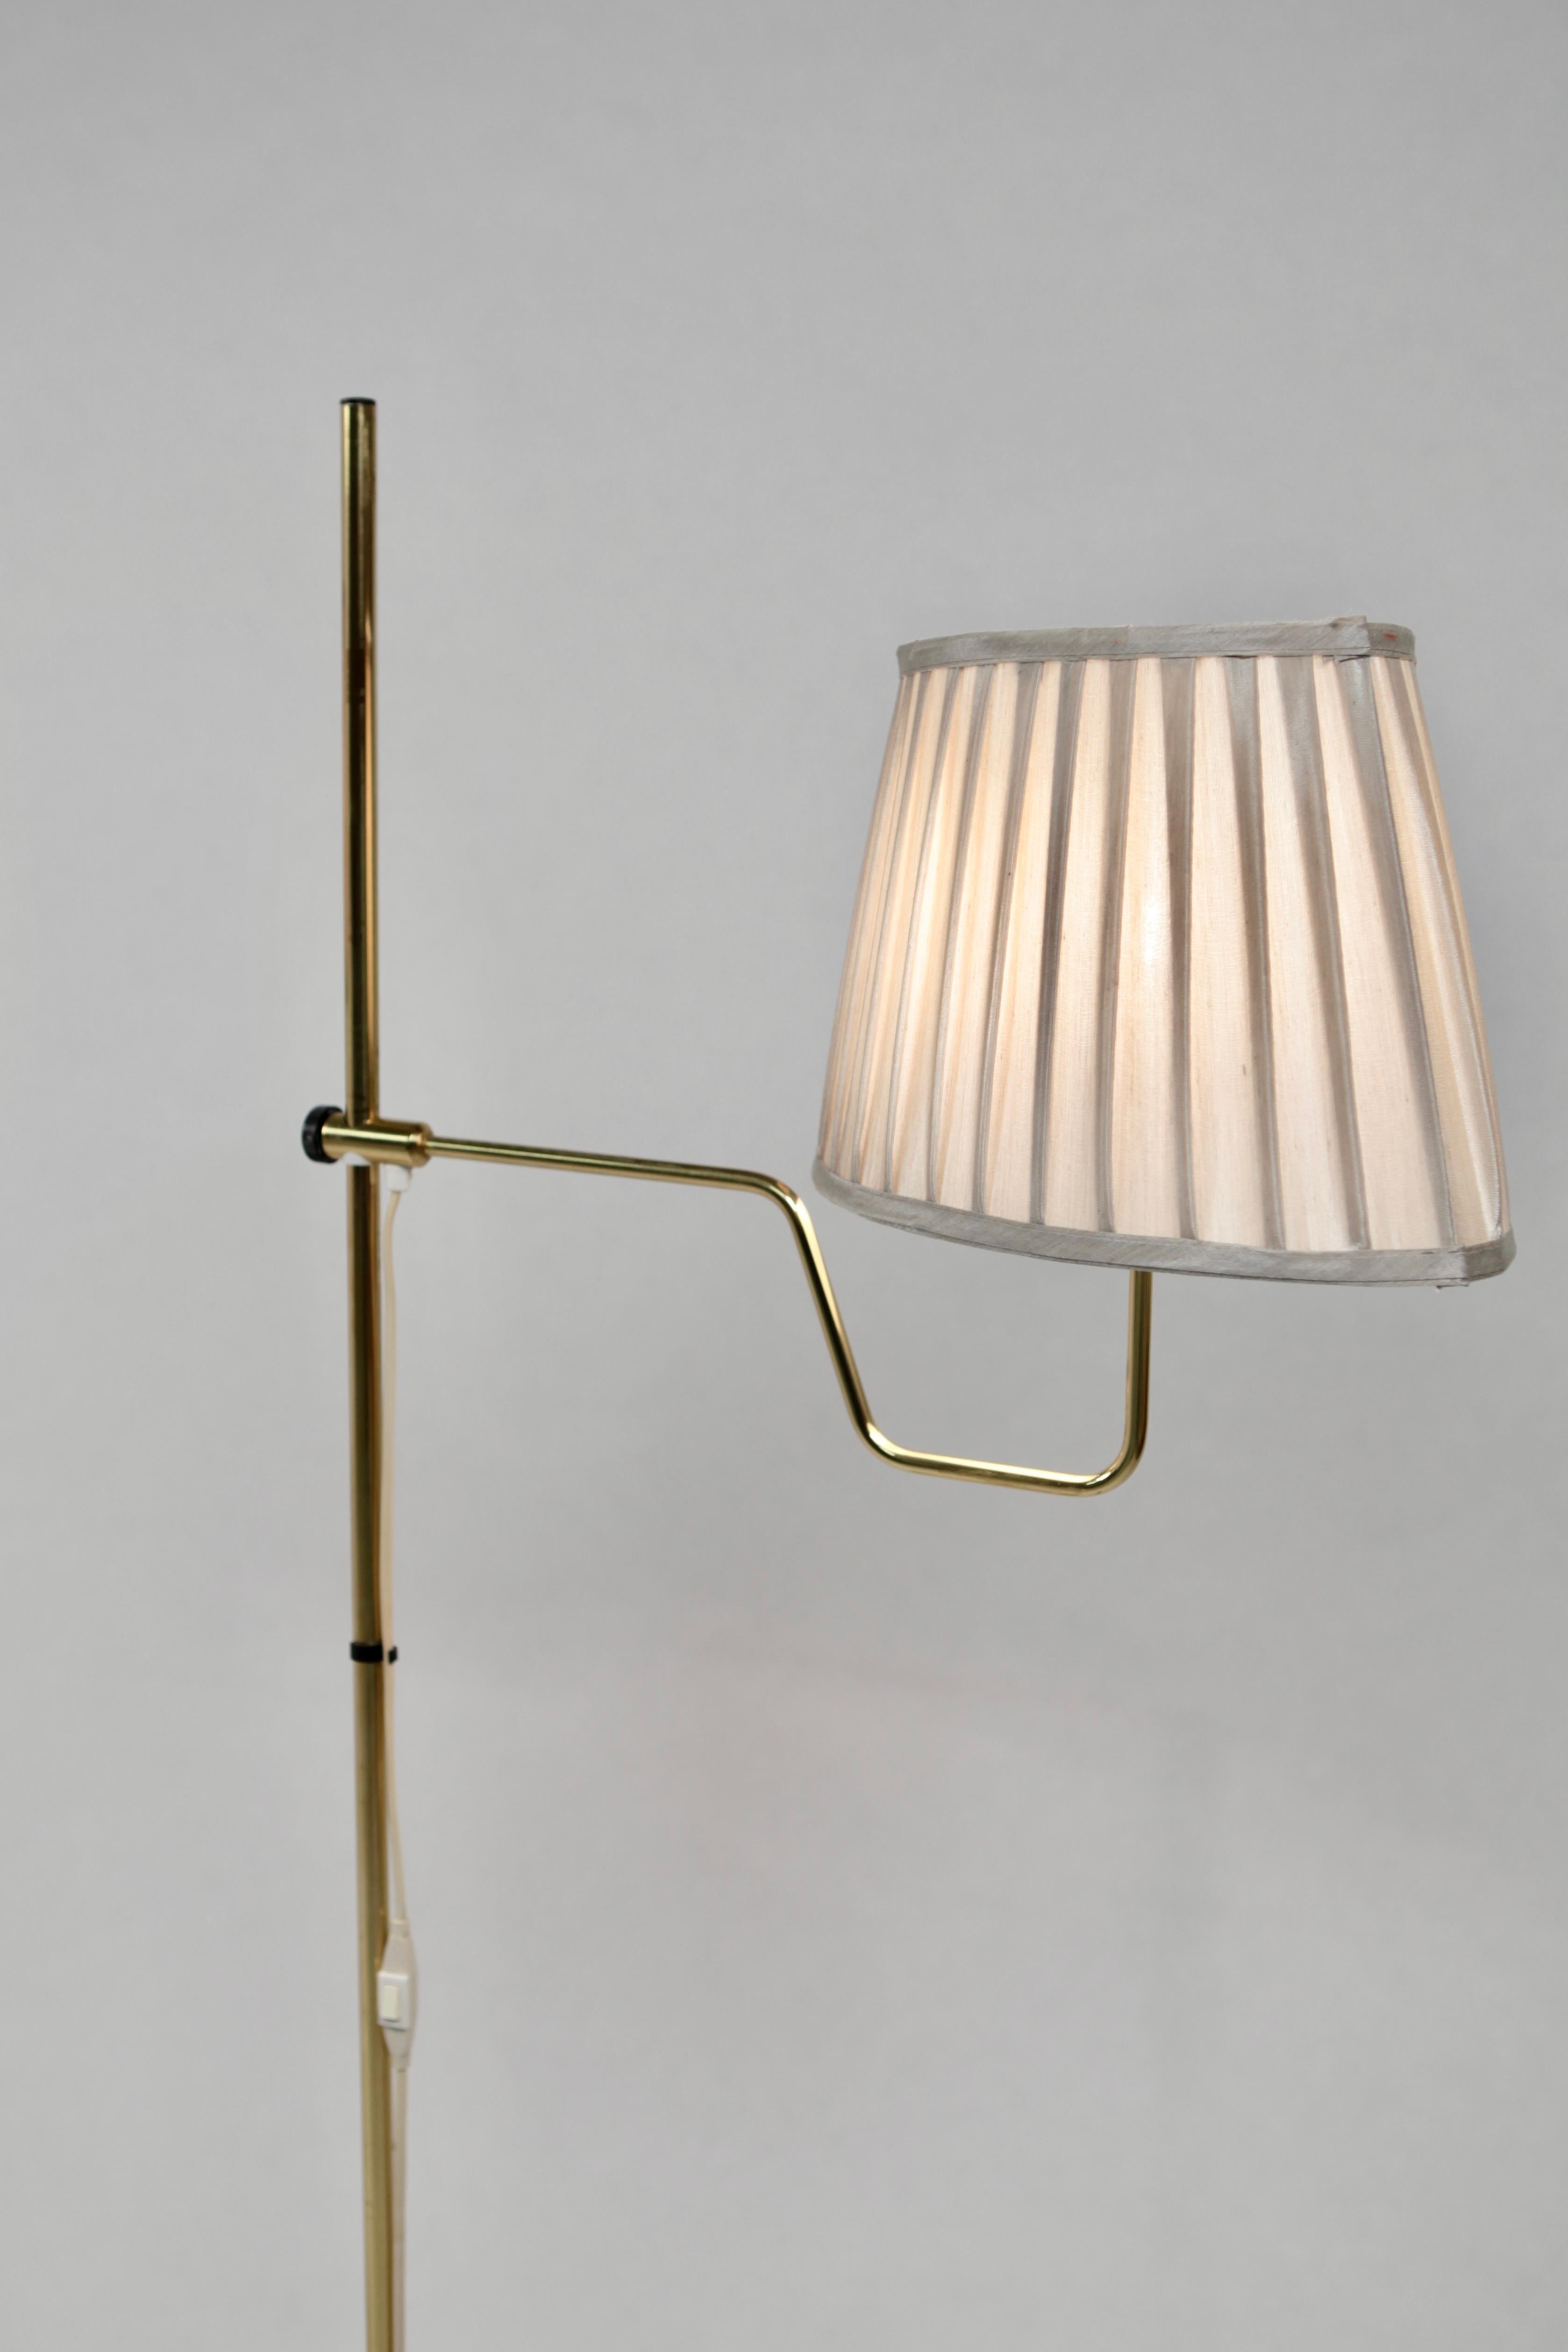 Hans-Agne Jakobsson, Pair of Rare Floor Lamps, Model G-192 M, in Brass, 1950s In Good Condition For Sale In Berlin, DE